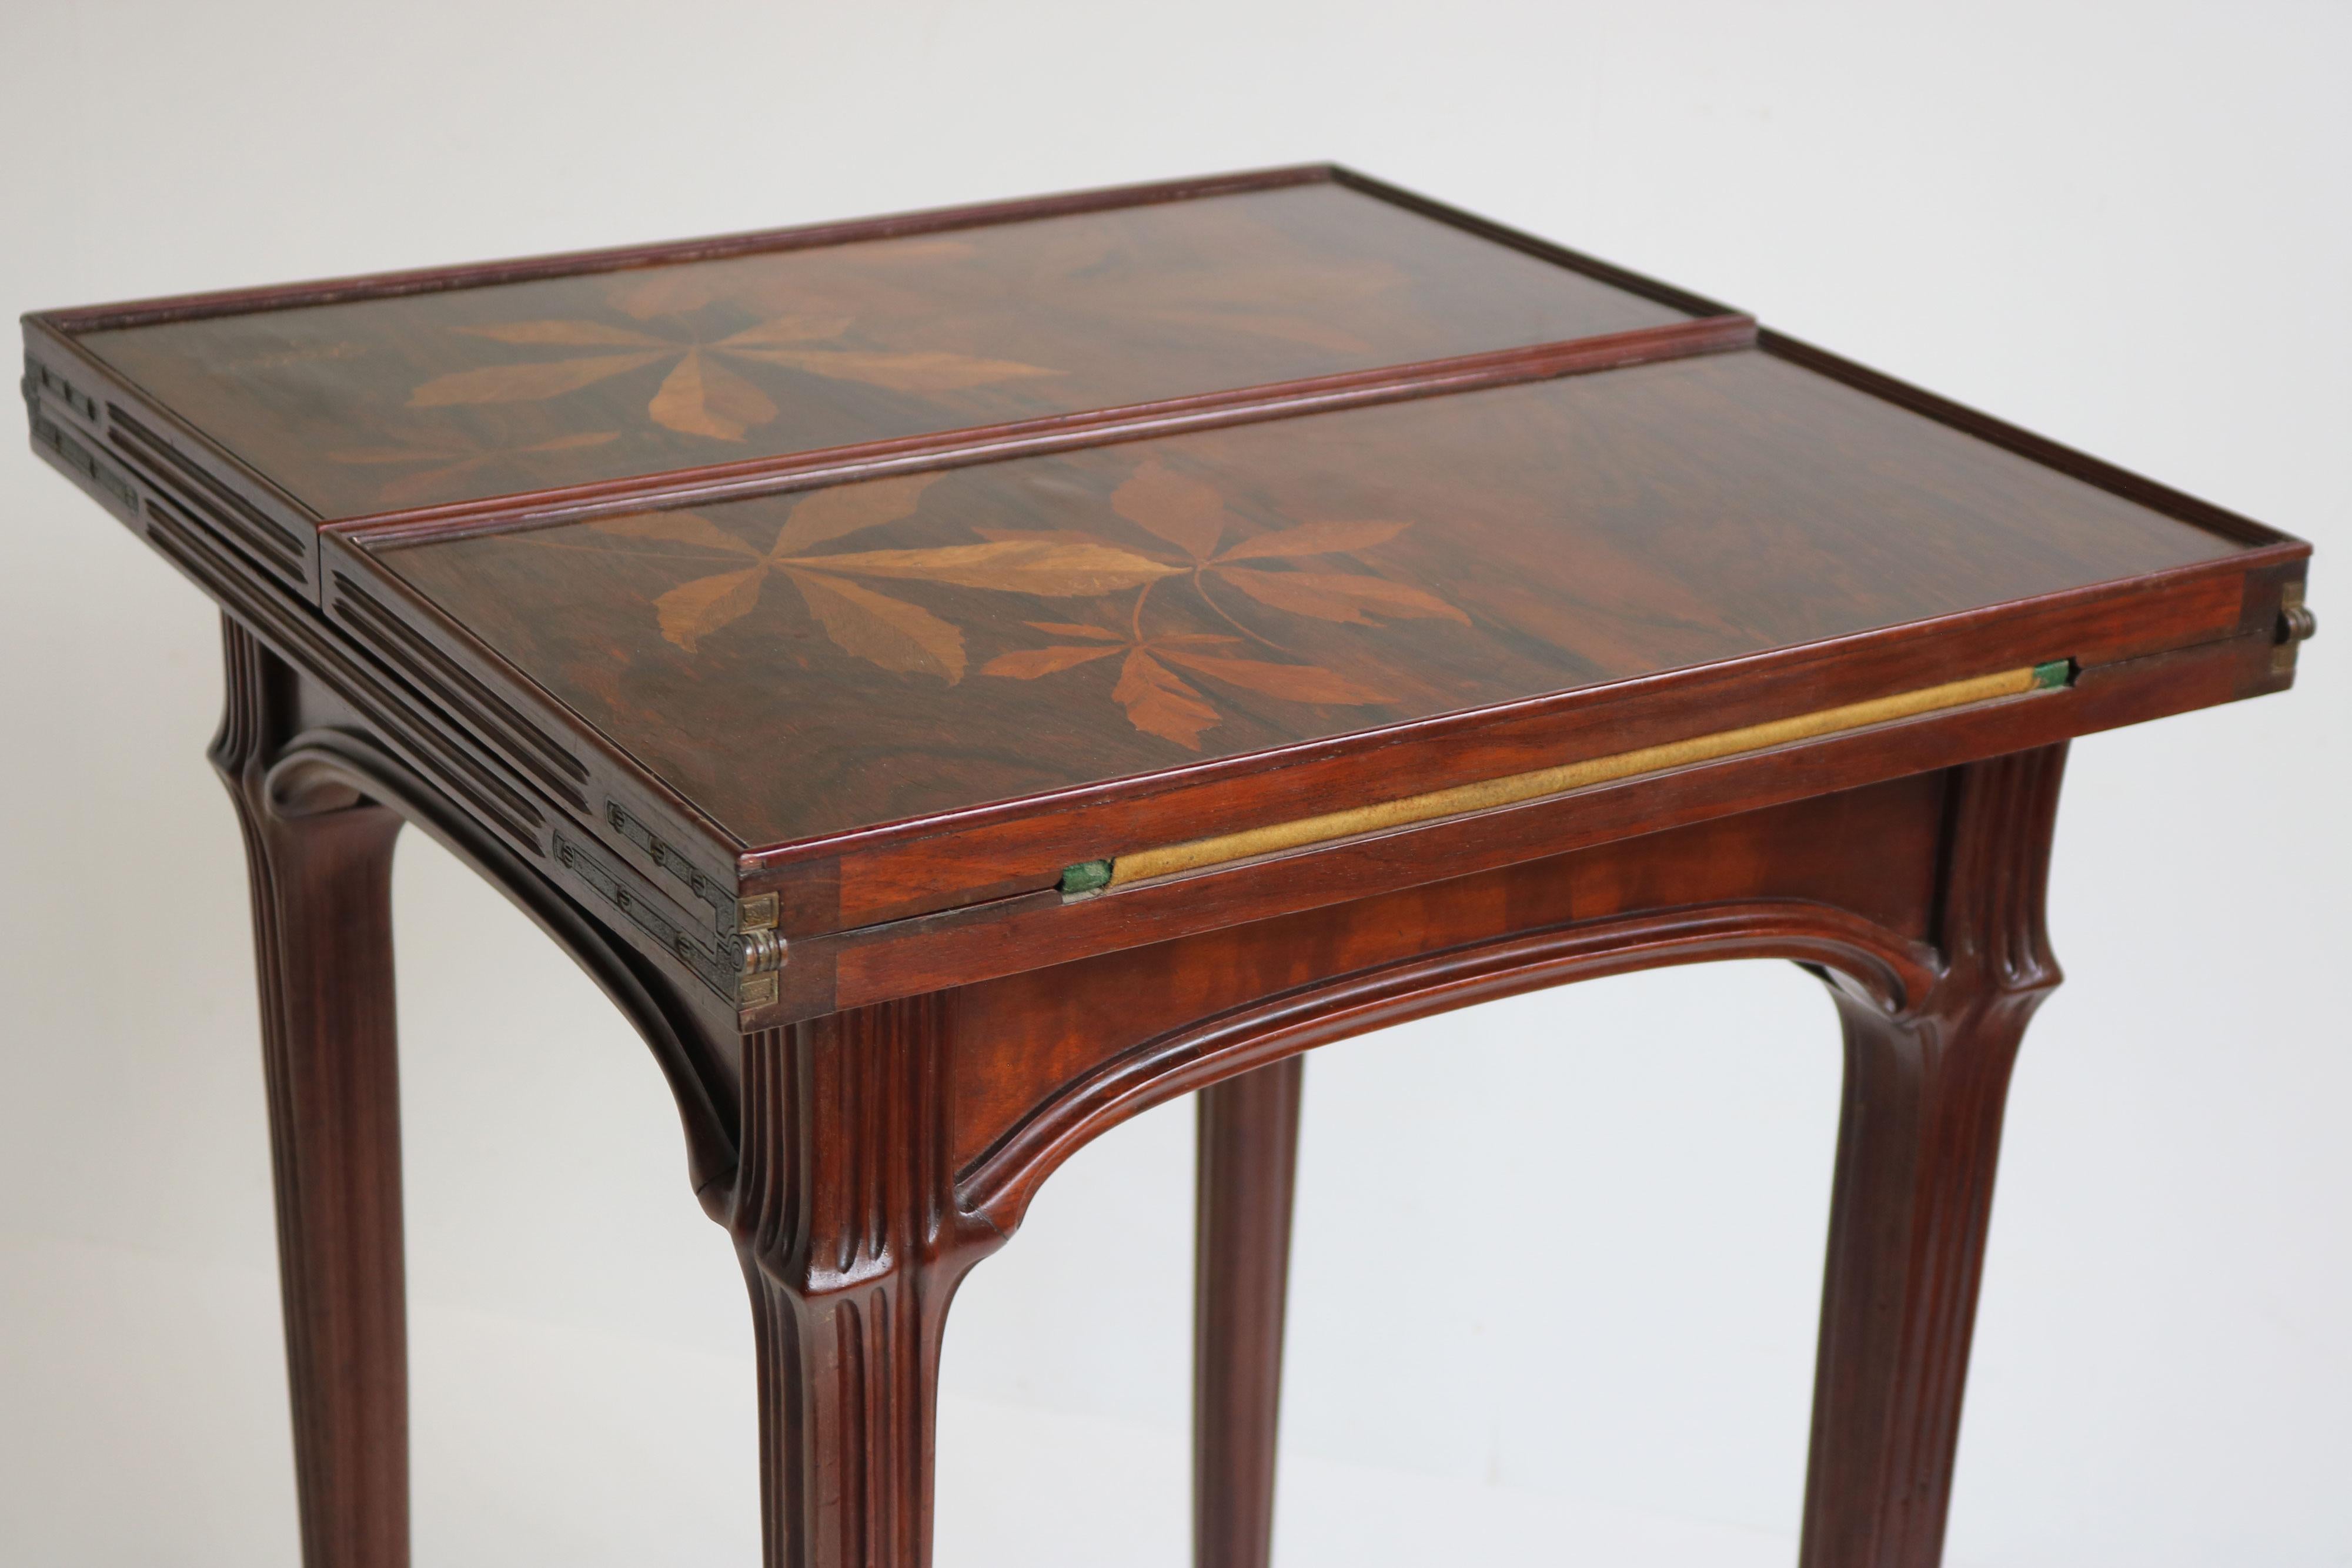 Early 20th Century Original French Art Nouveau game table / side table by Emile Gallé 1905 chestnut For Sale